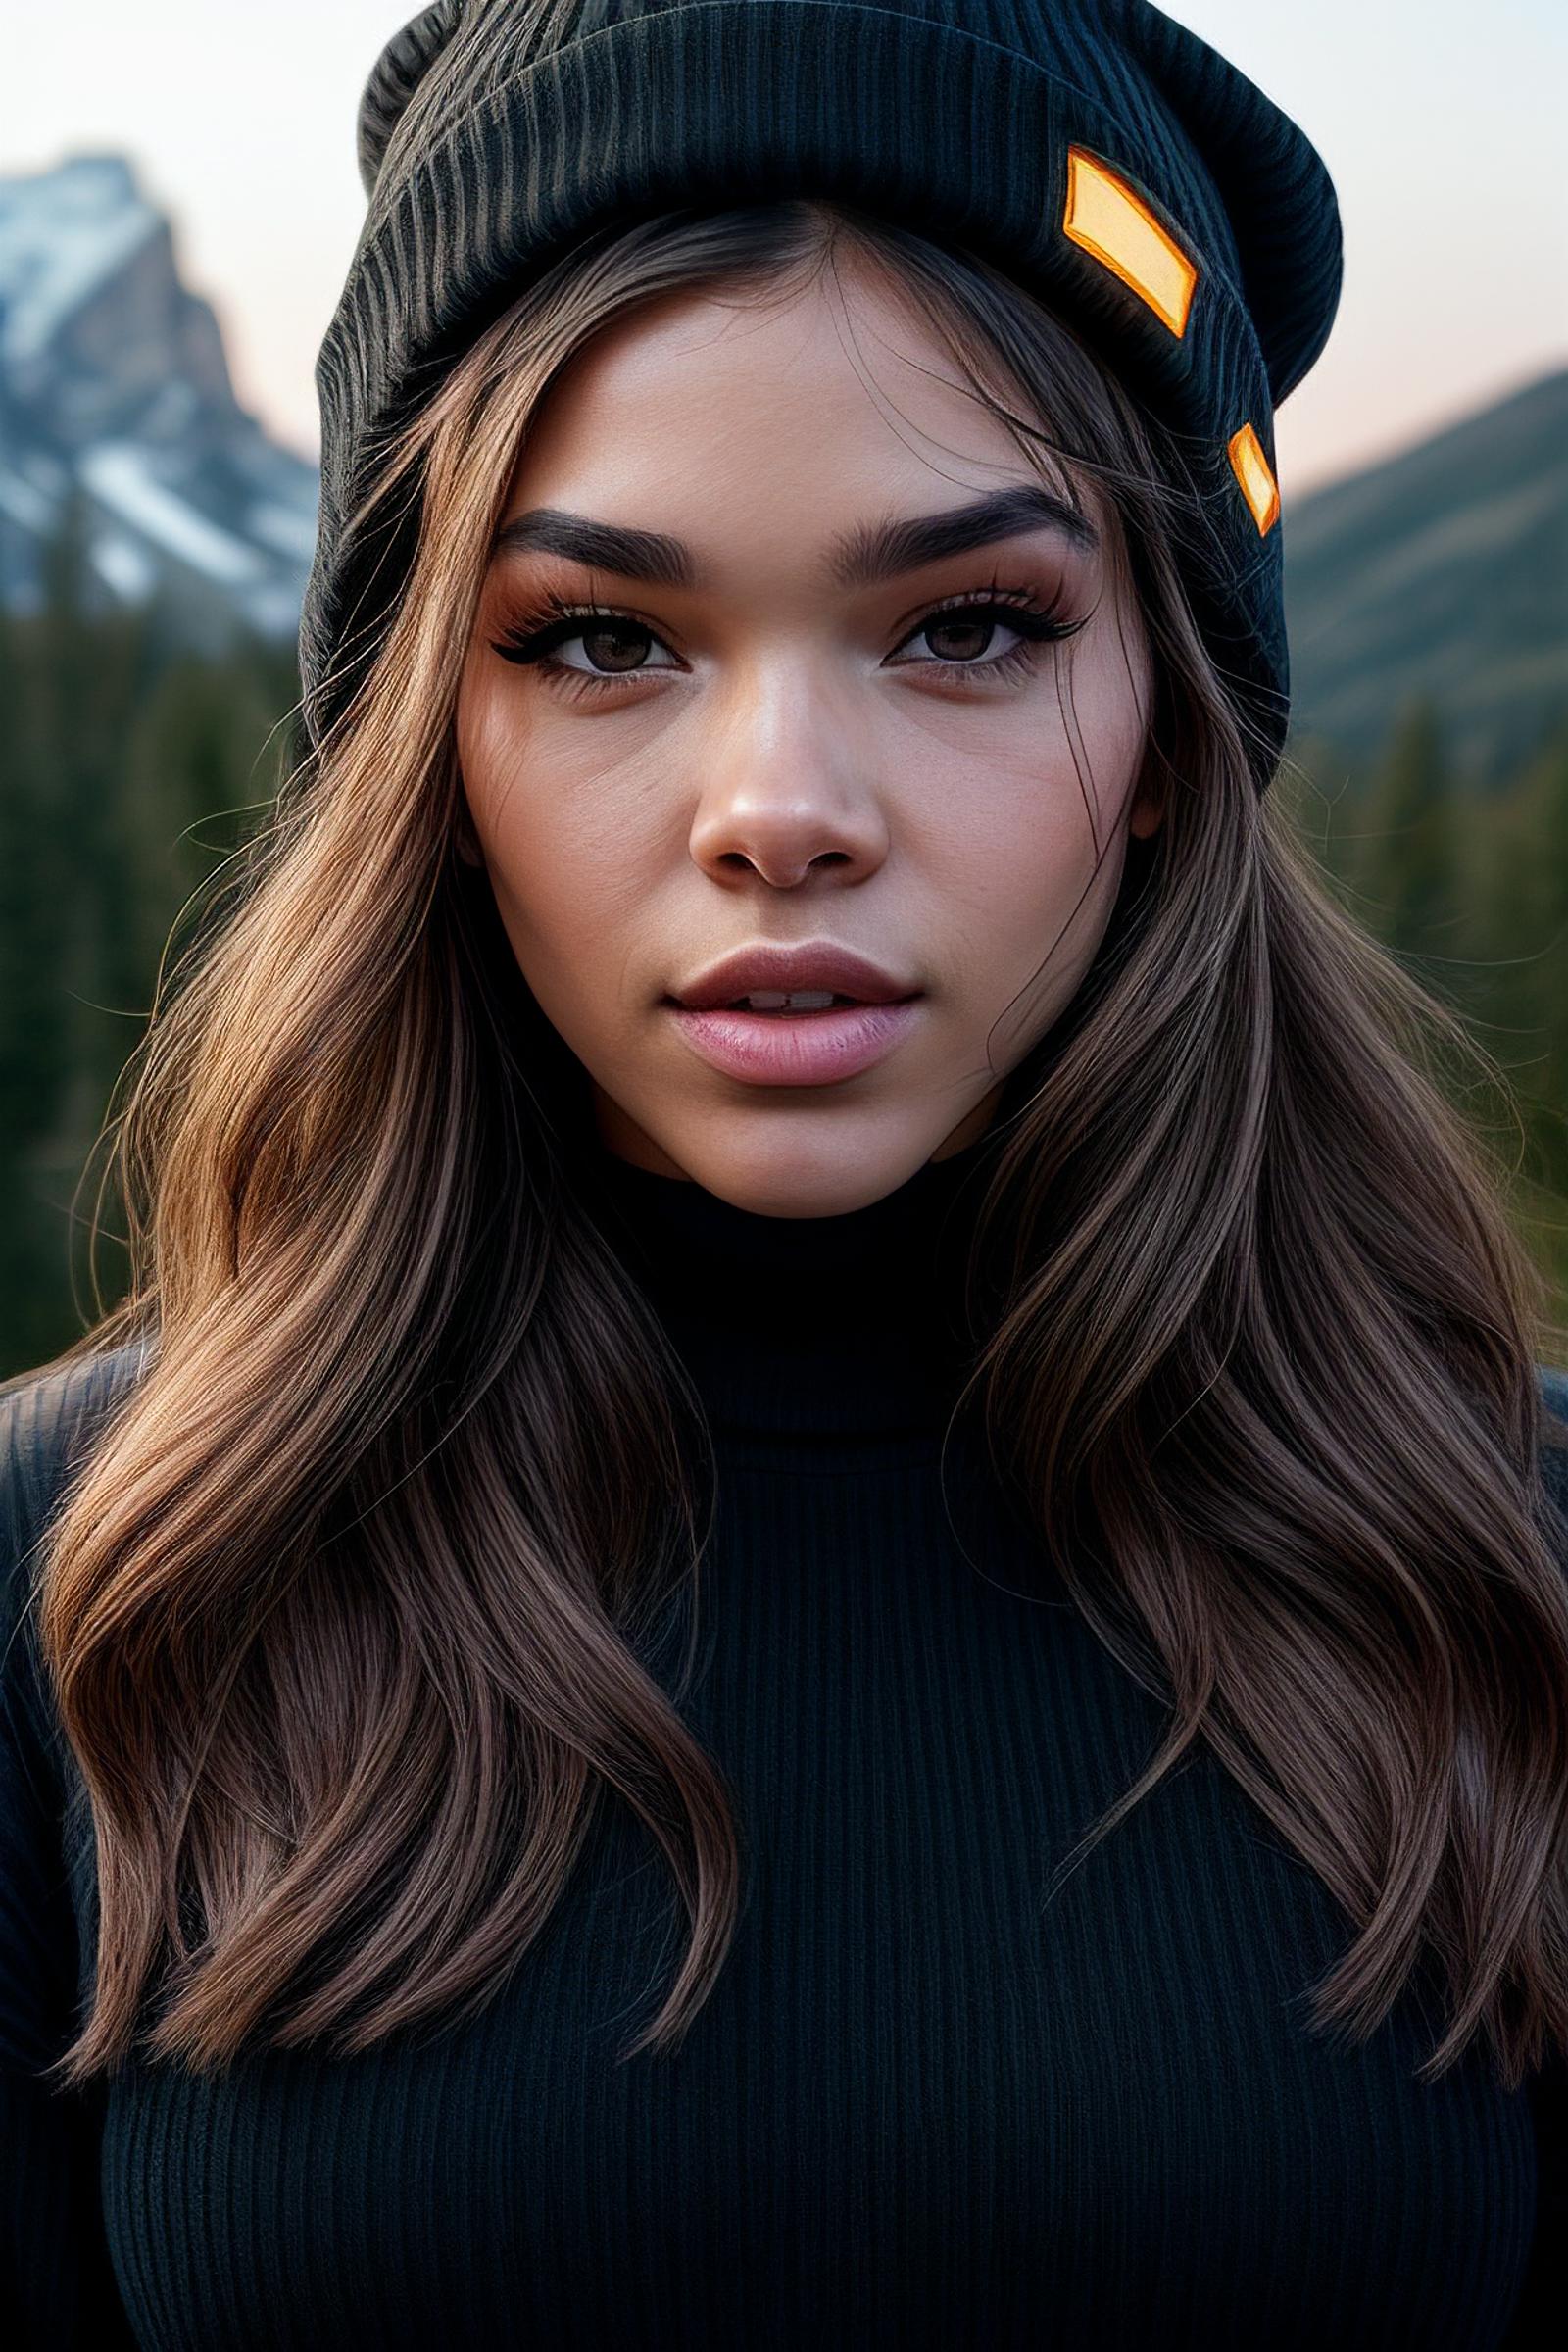 Hailee Steinfeld - Textual Inversion image by ElizaPottinger